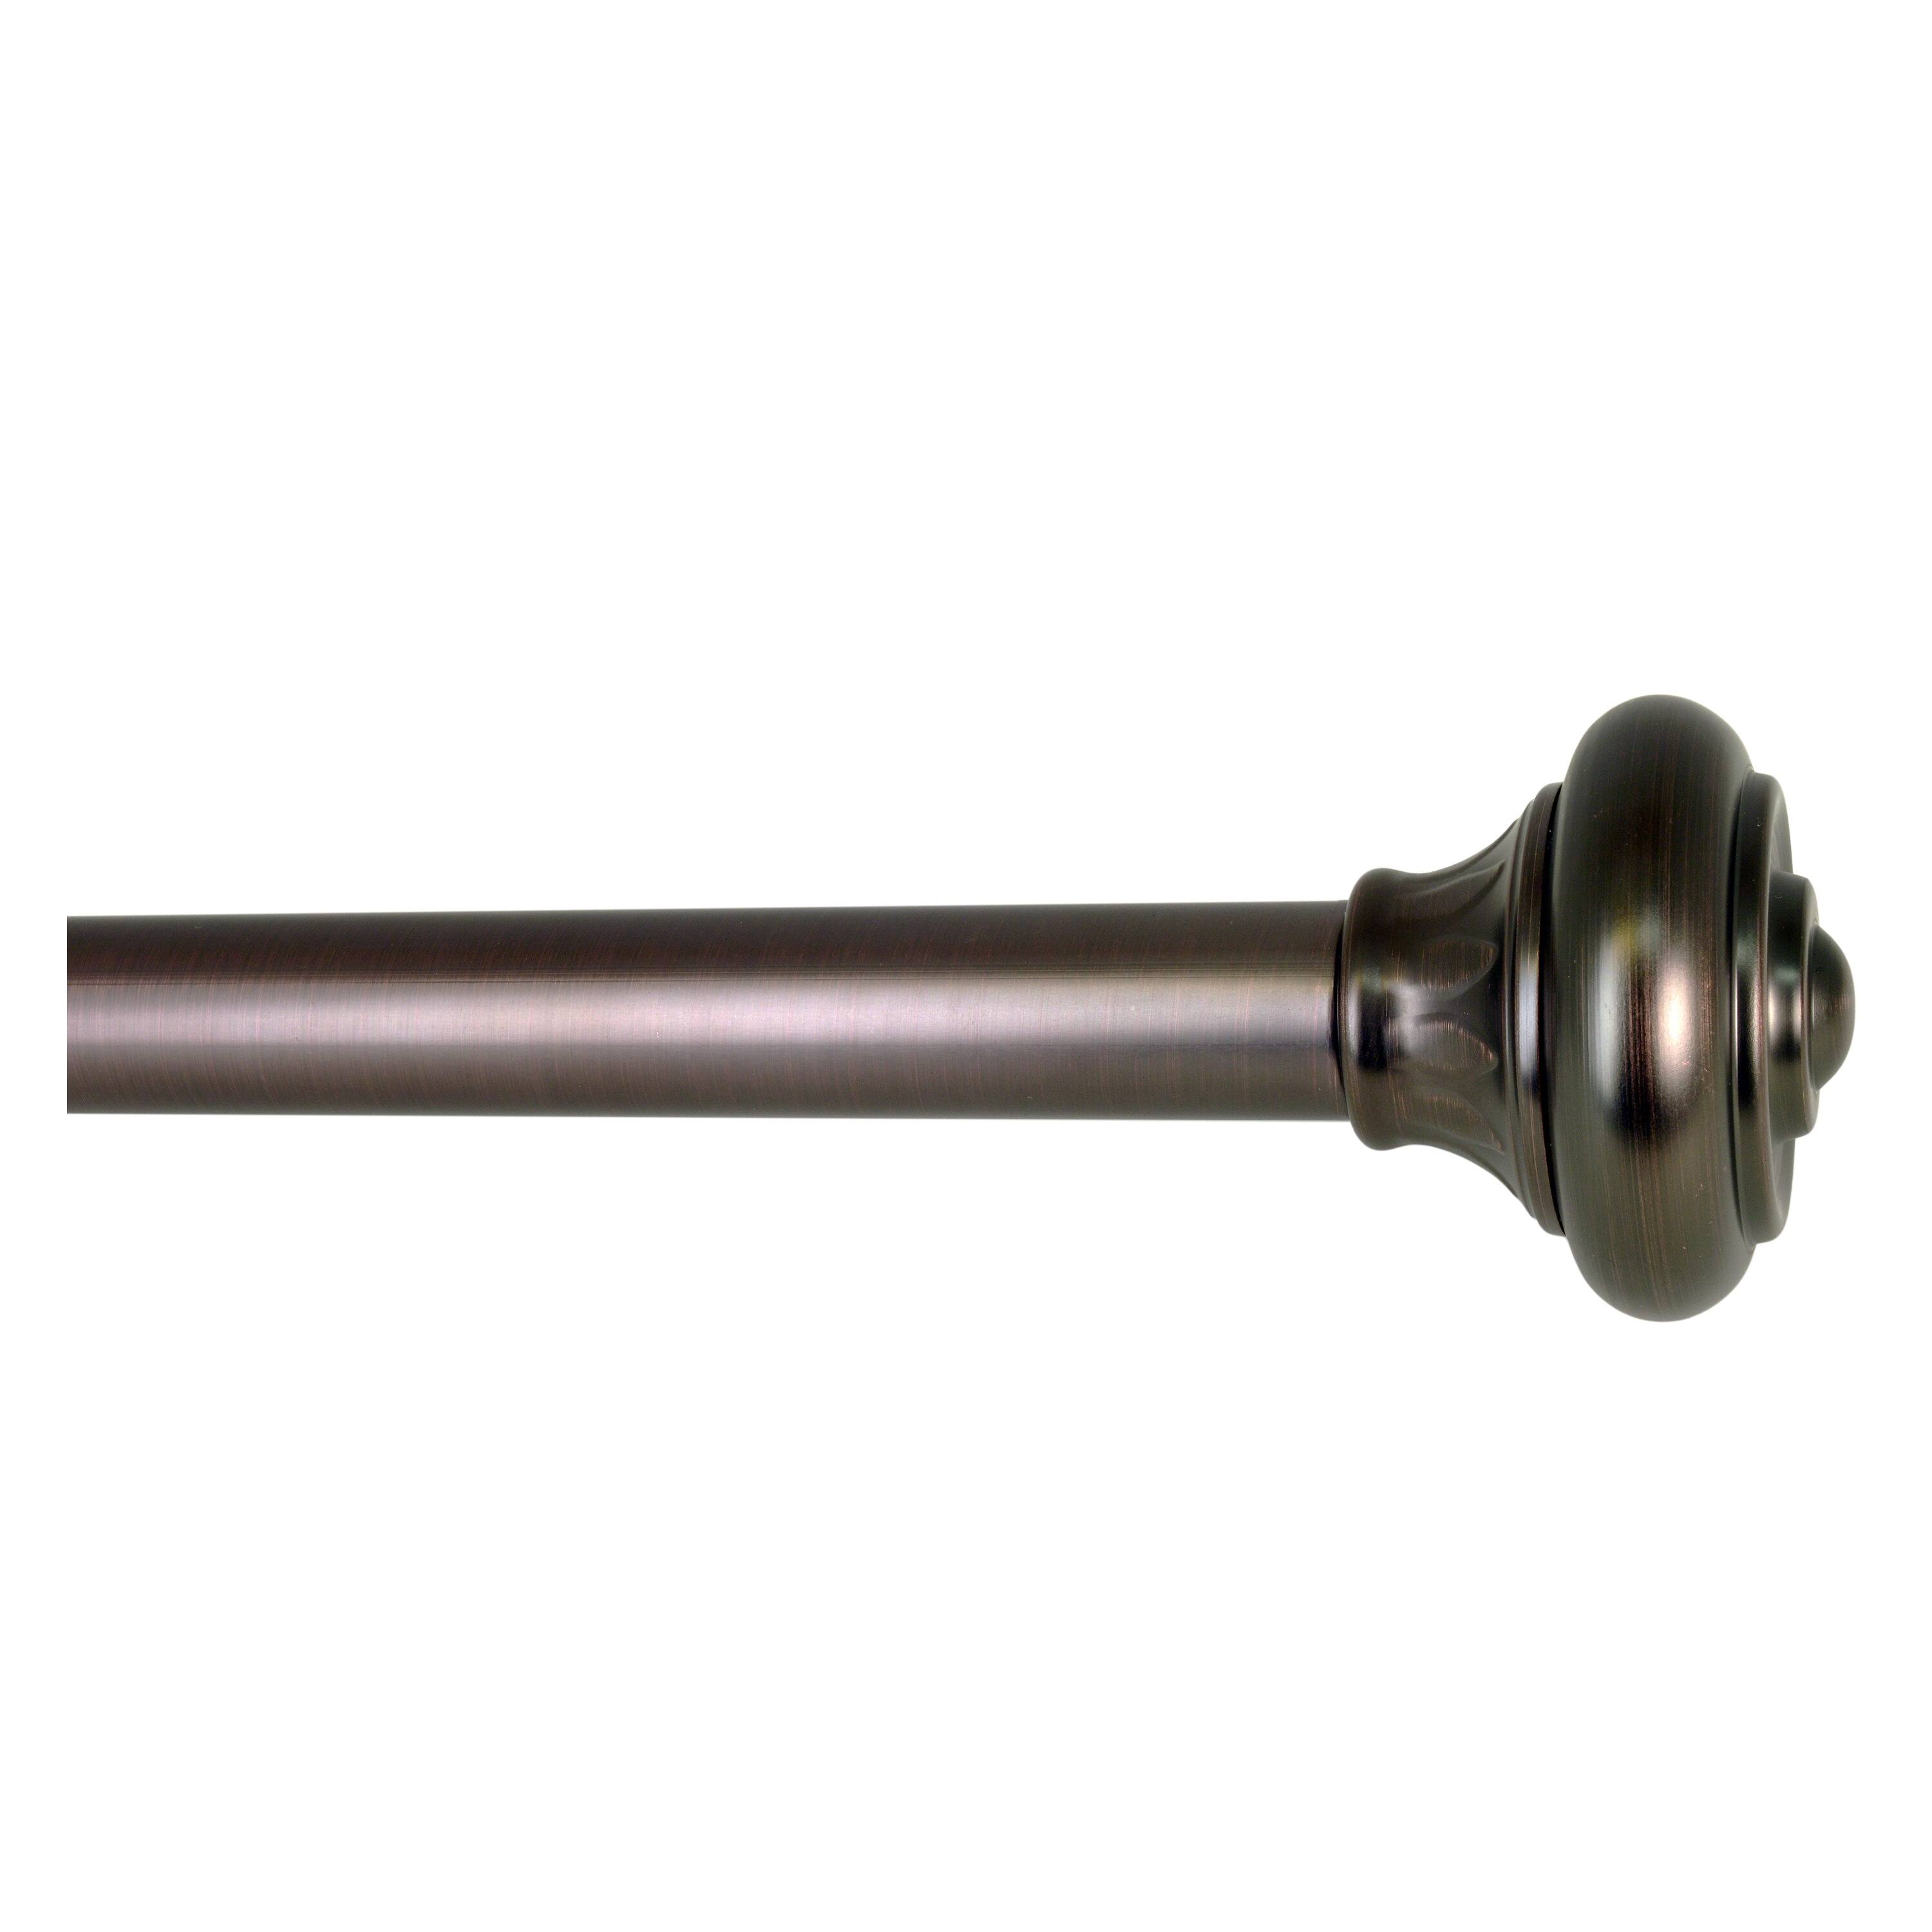 Versailles Home Fashions 86-144-in Lexington Rod with Royale Finial - Antique Bronze/Brown LX0886-78